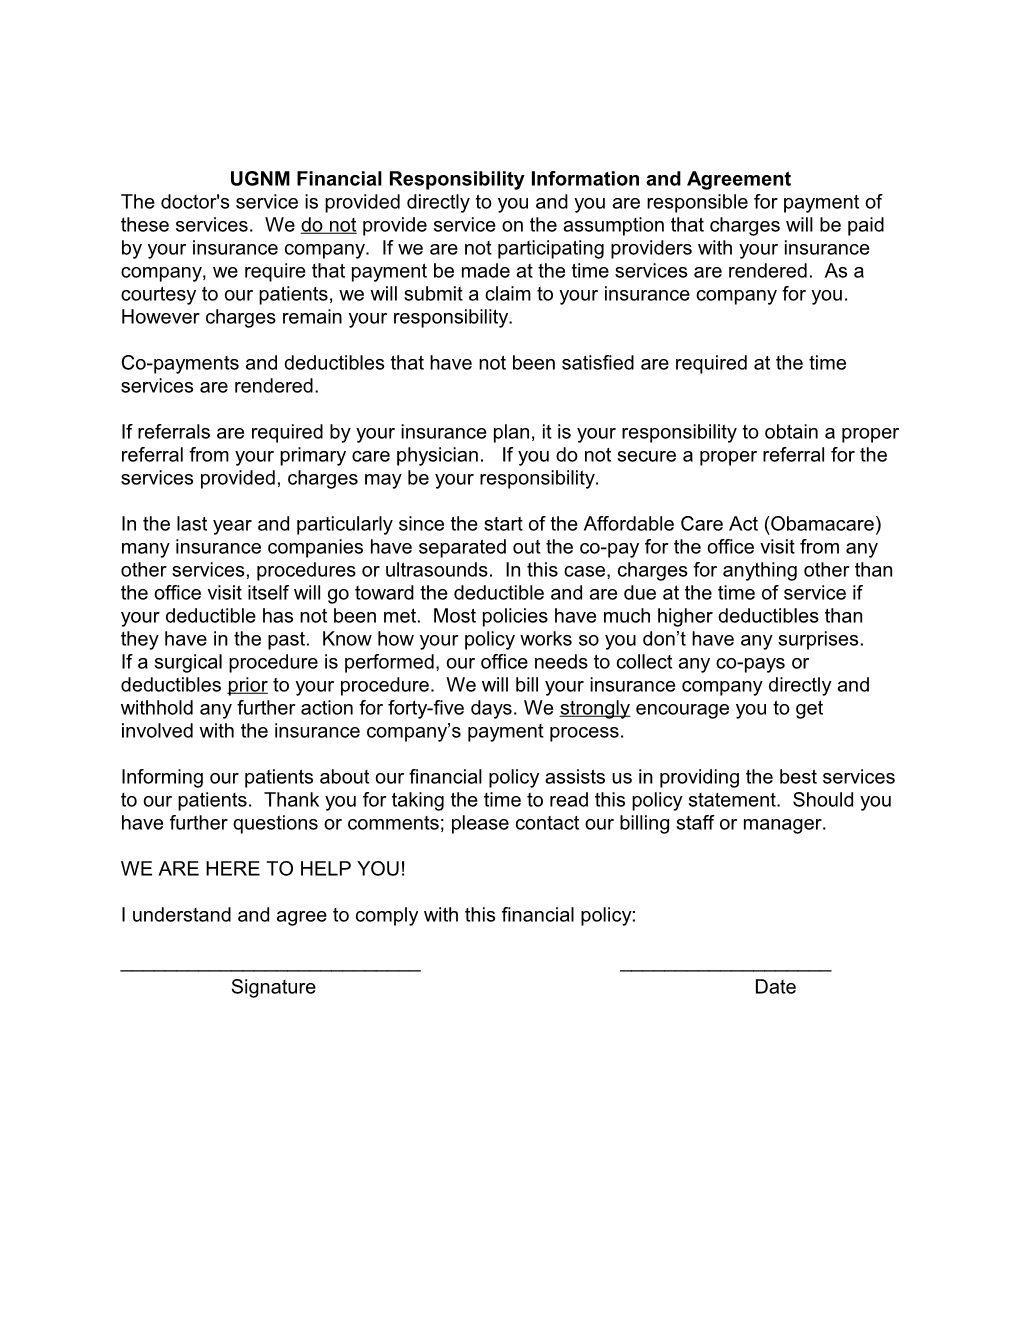 UGNM Financial Responsibility Information and Agreement